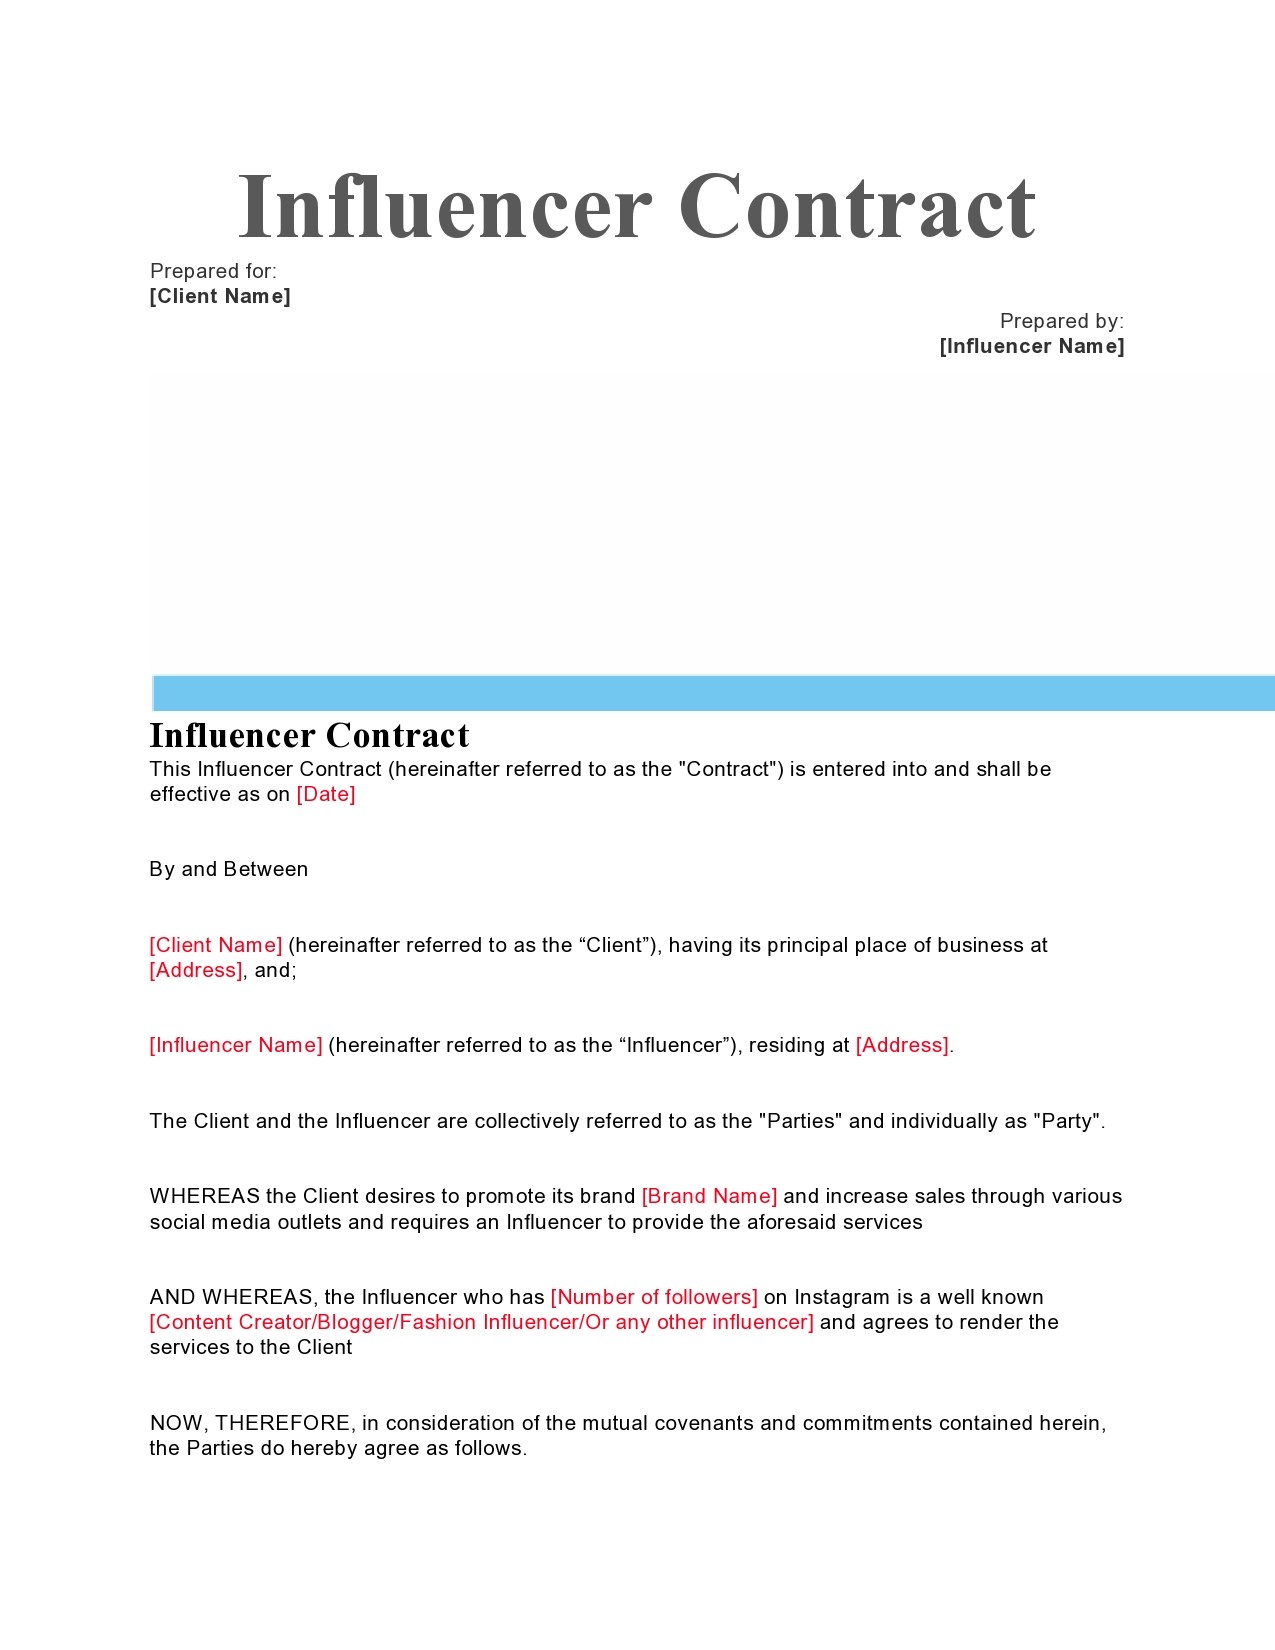 Free influencer contract template 07